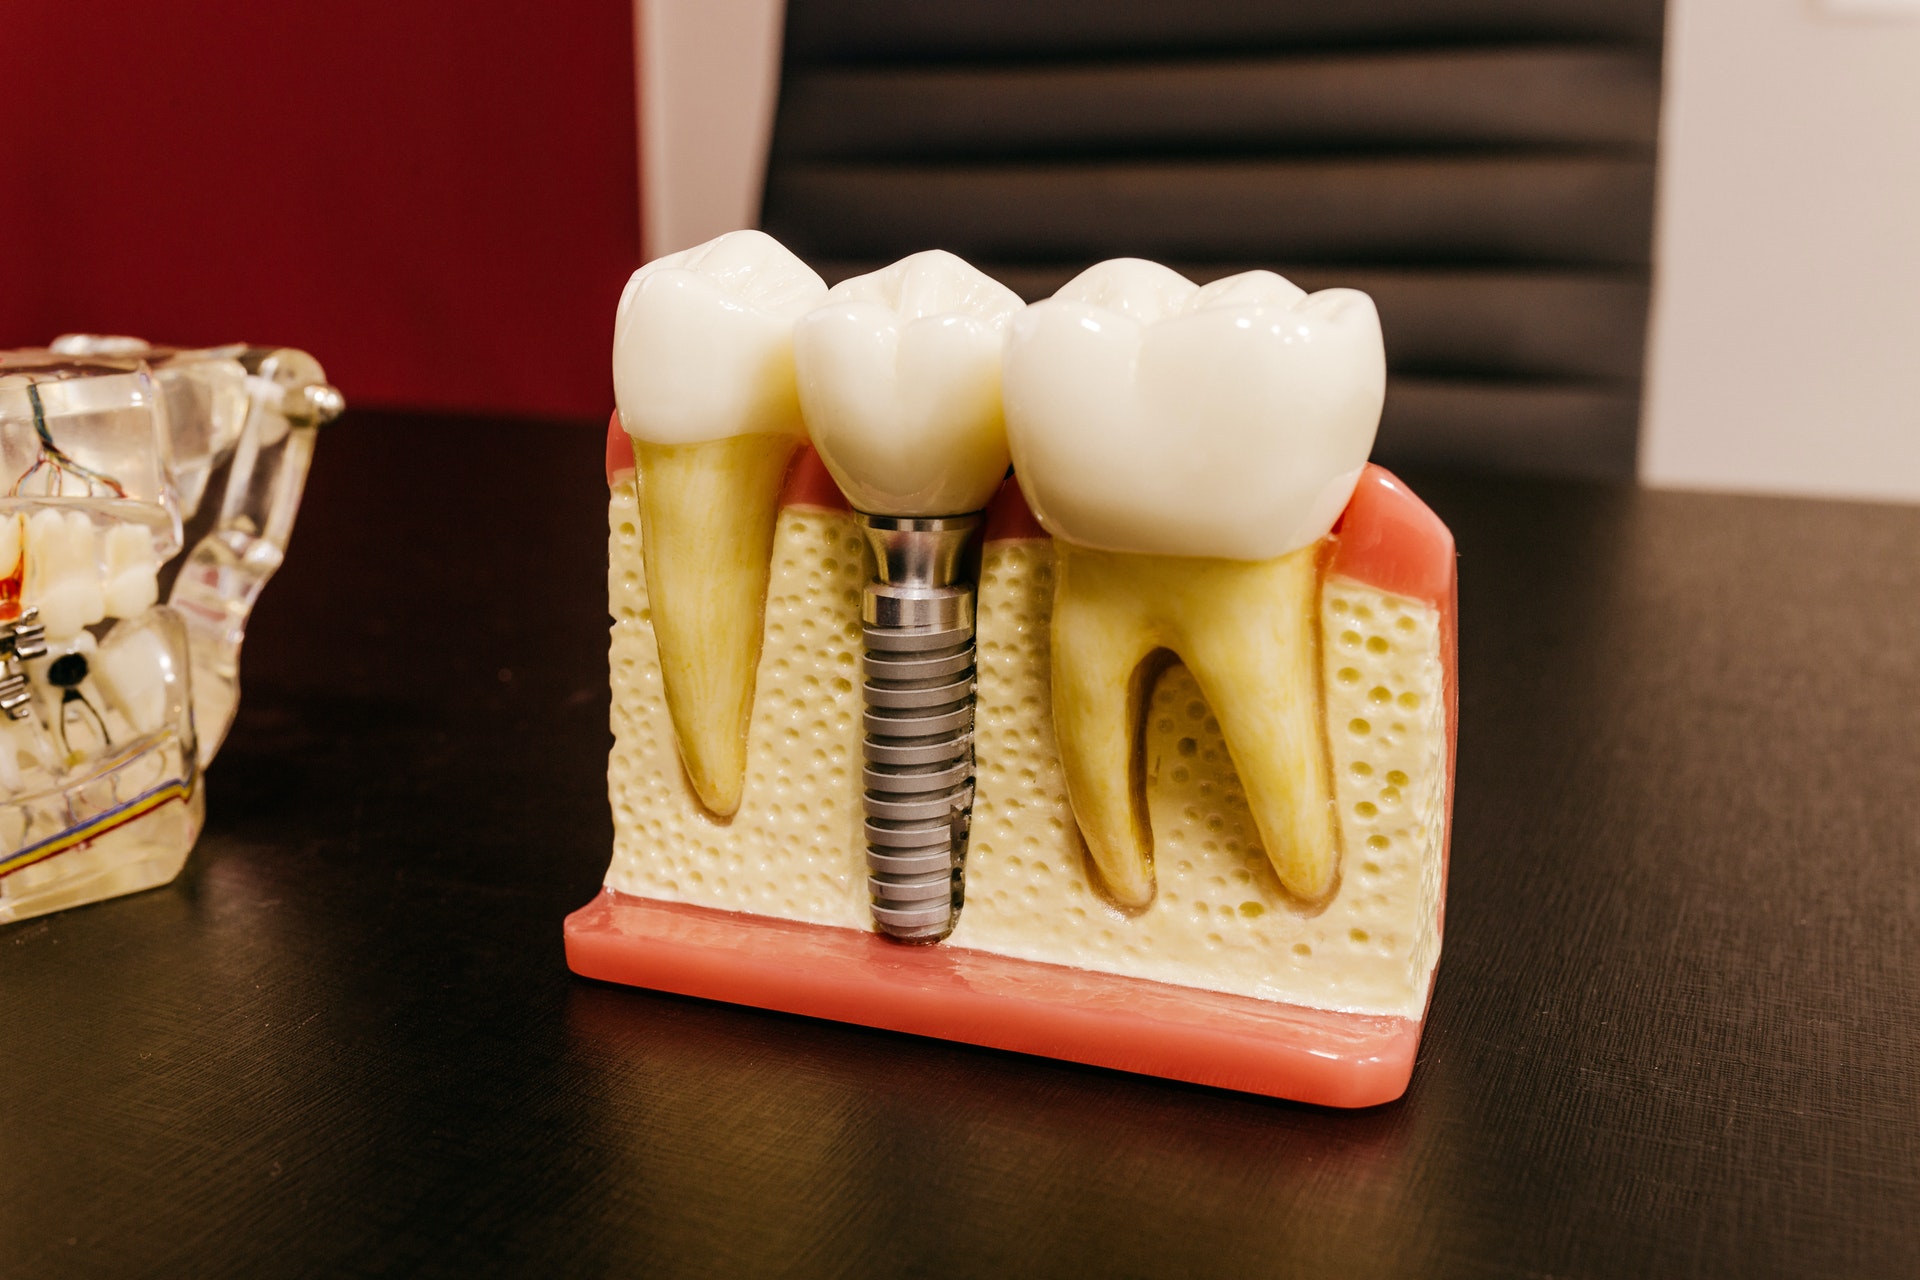 Transform Your Smile with Quality Implants